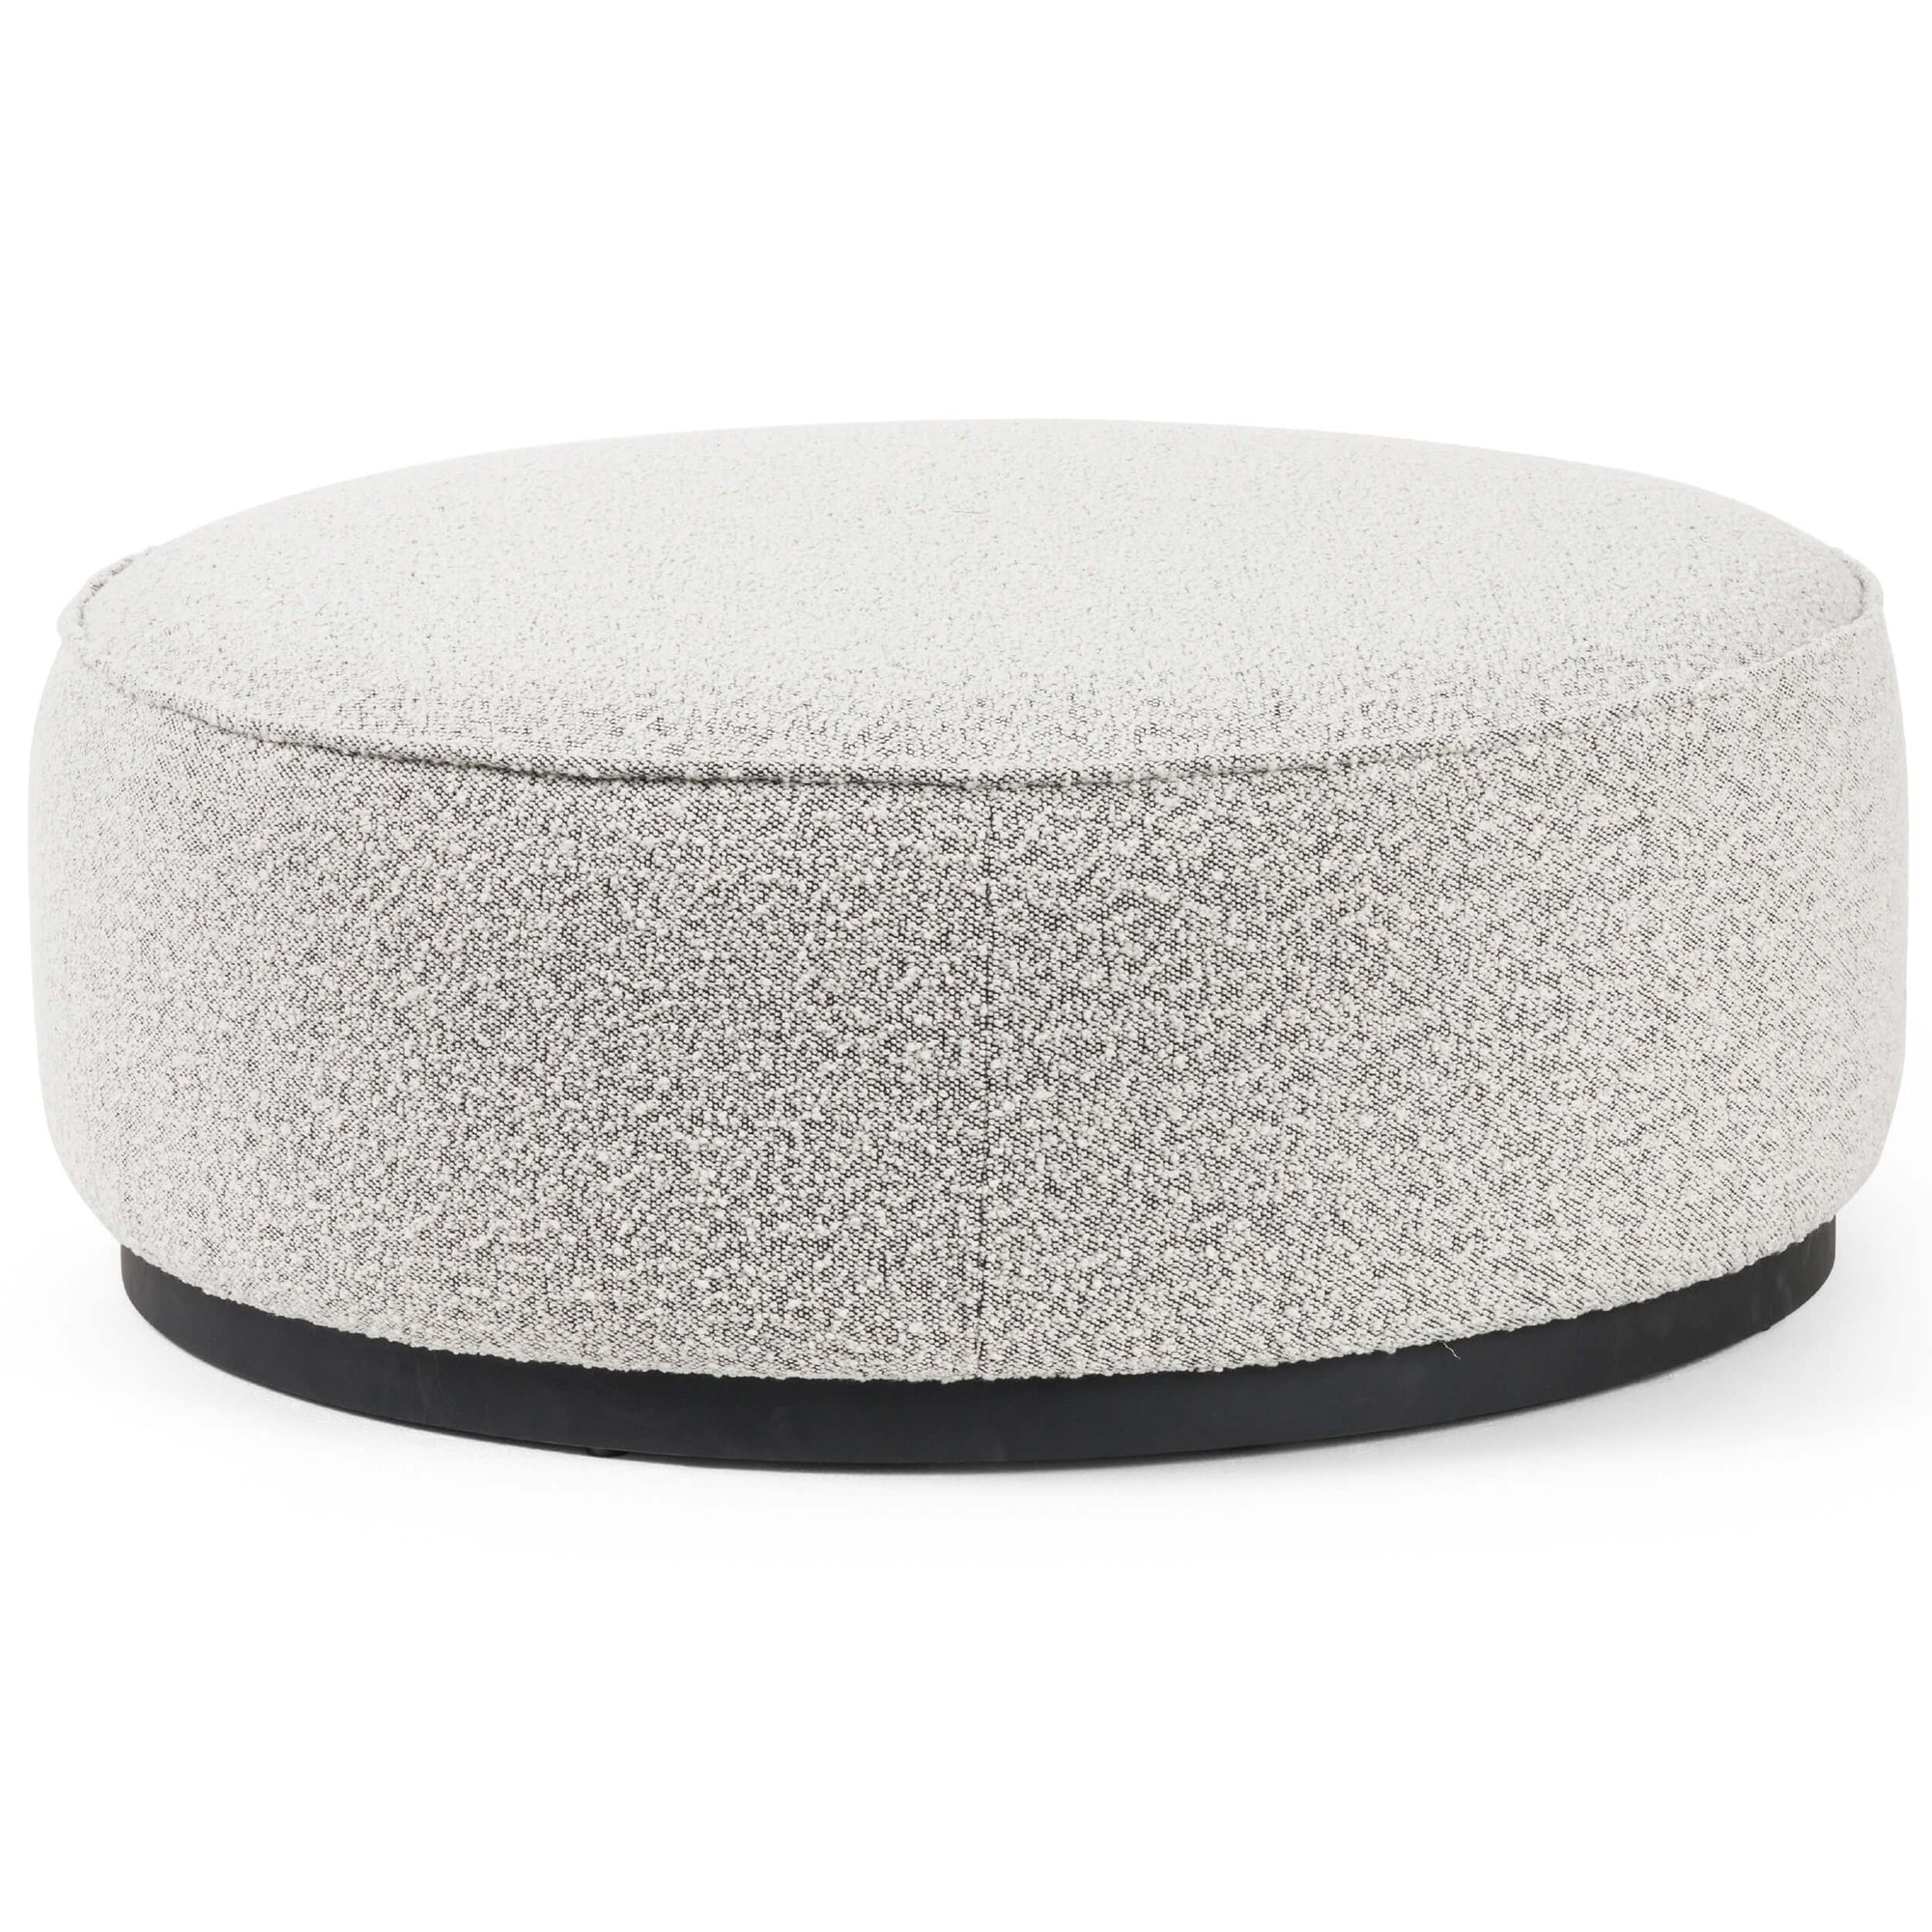 Sinclair Large Round Ottoman, Knoll Domino – High Fashion Home